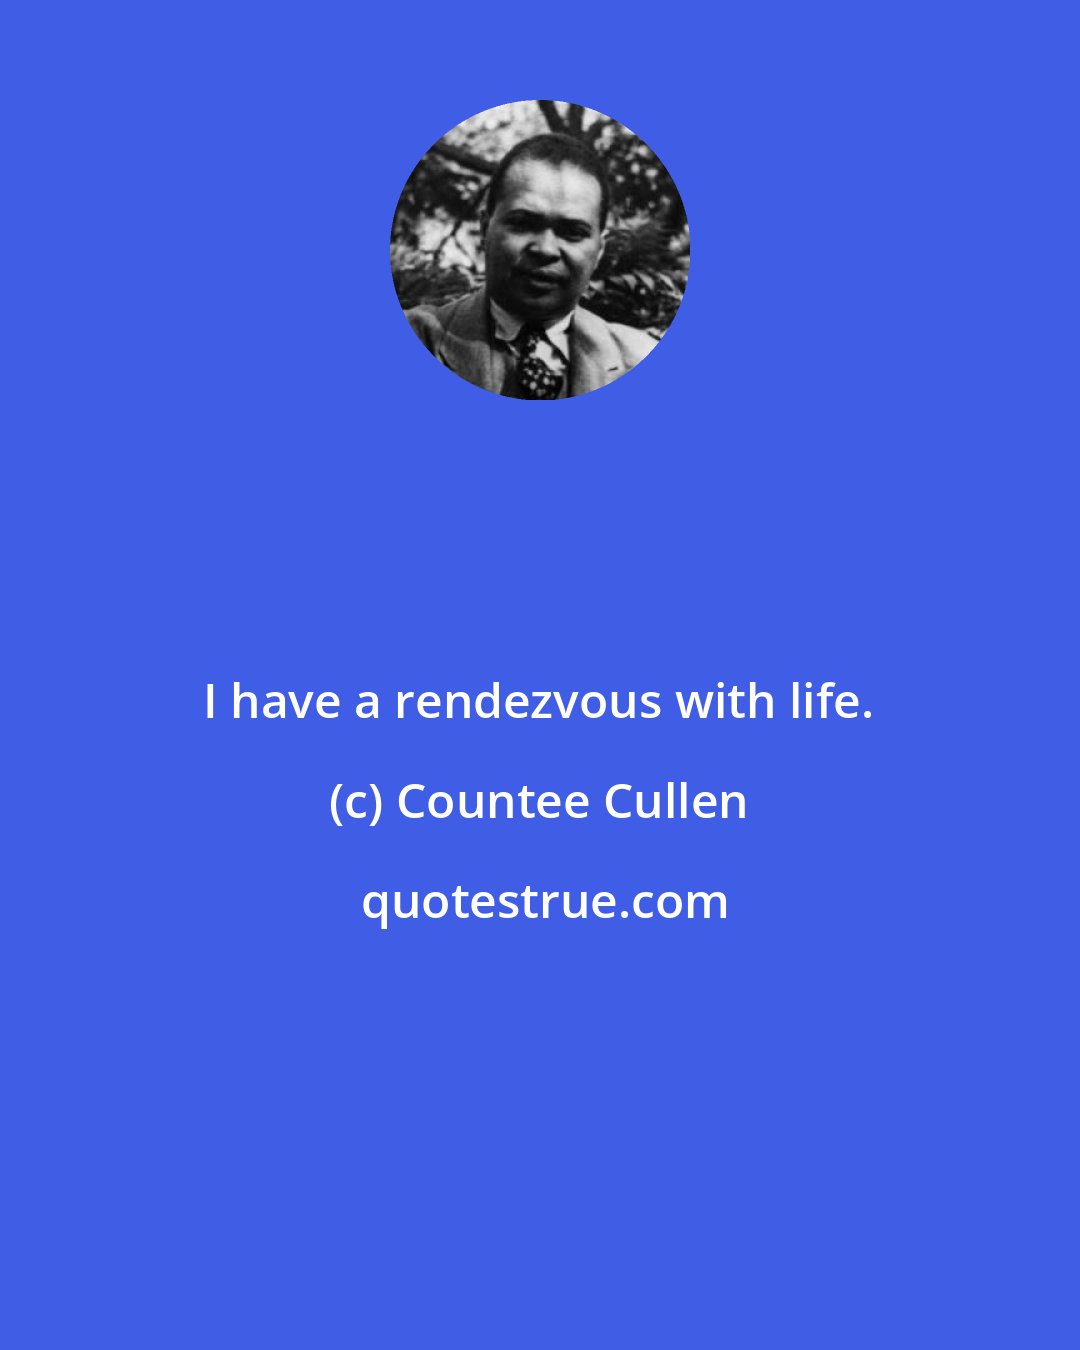 Countee Cullen: I have a rendezvous with life.